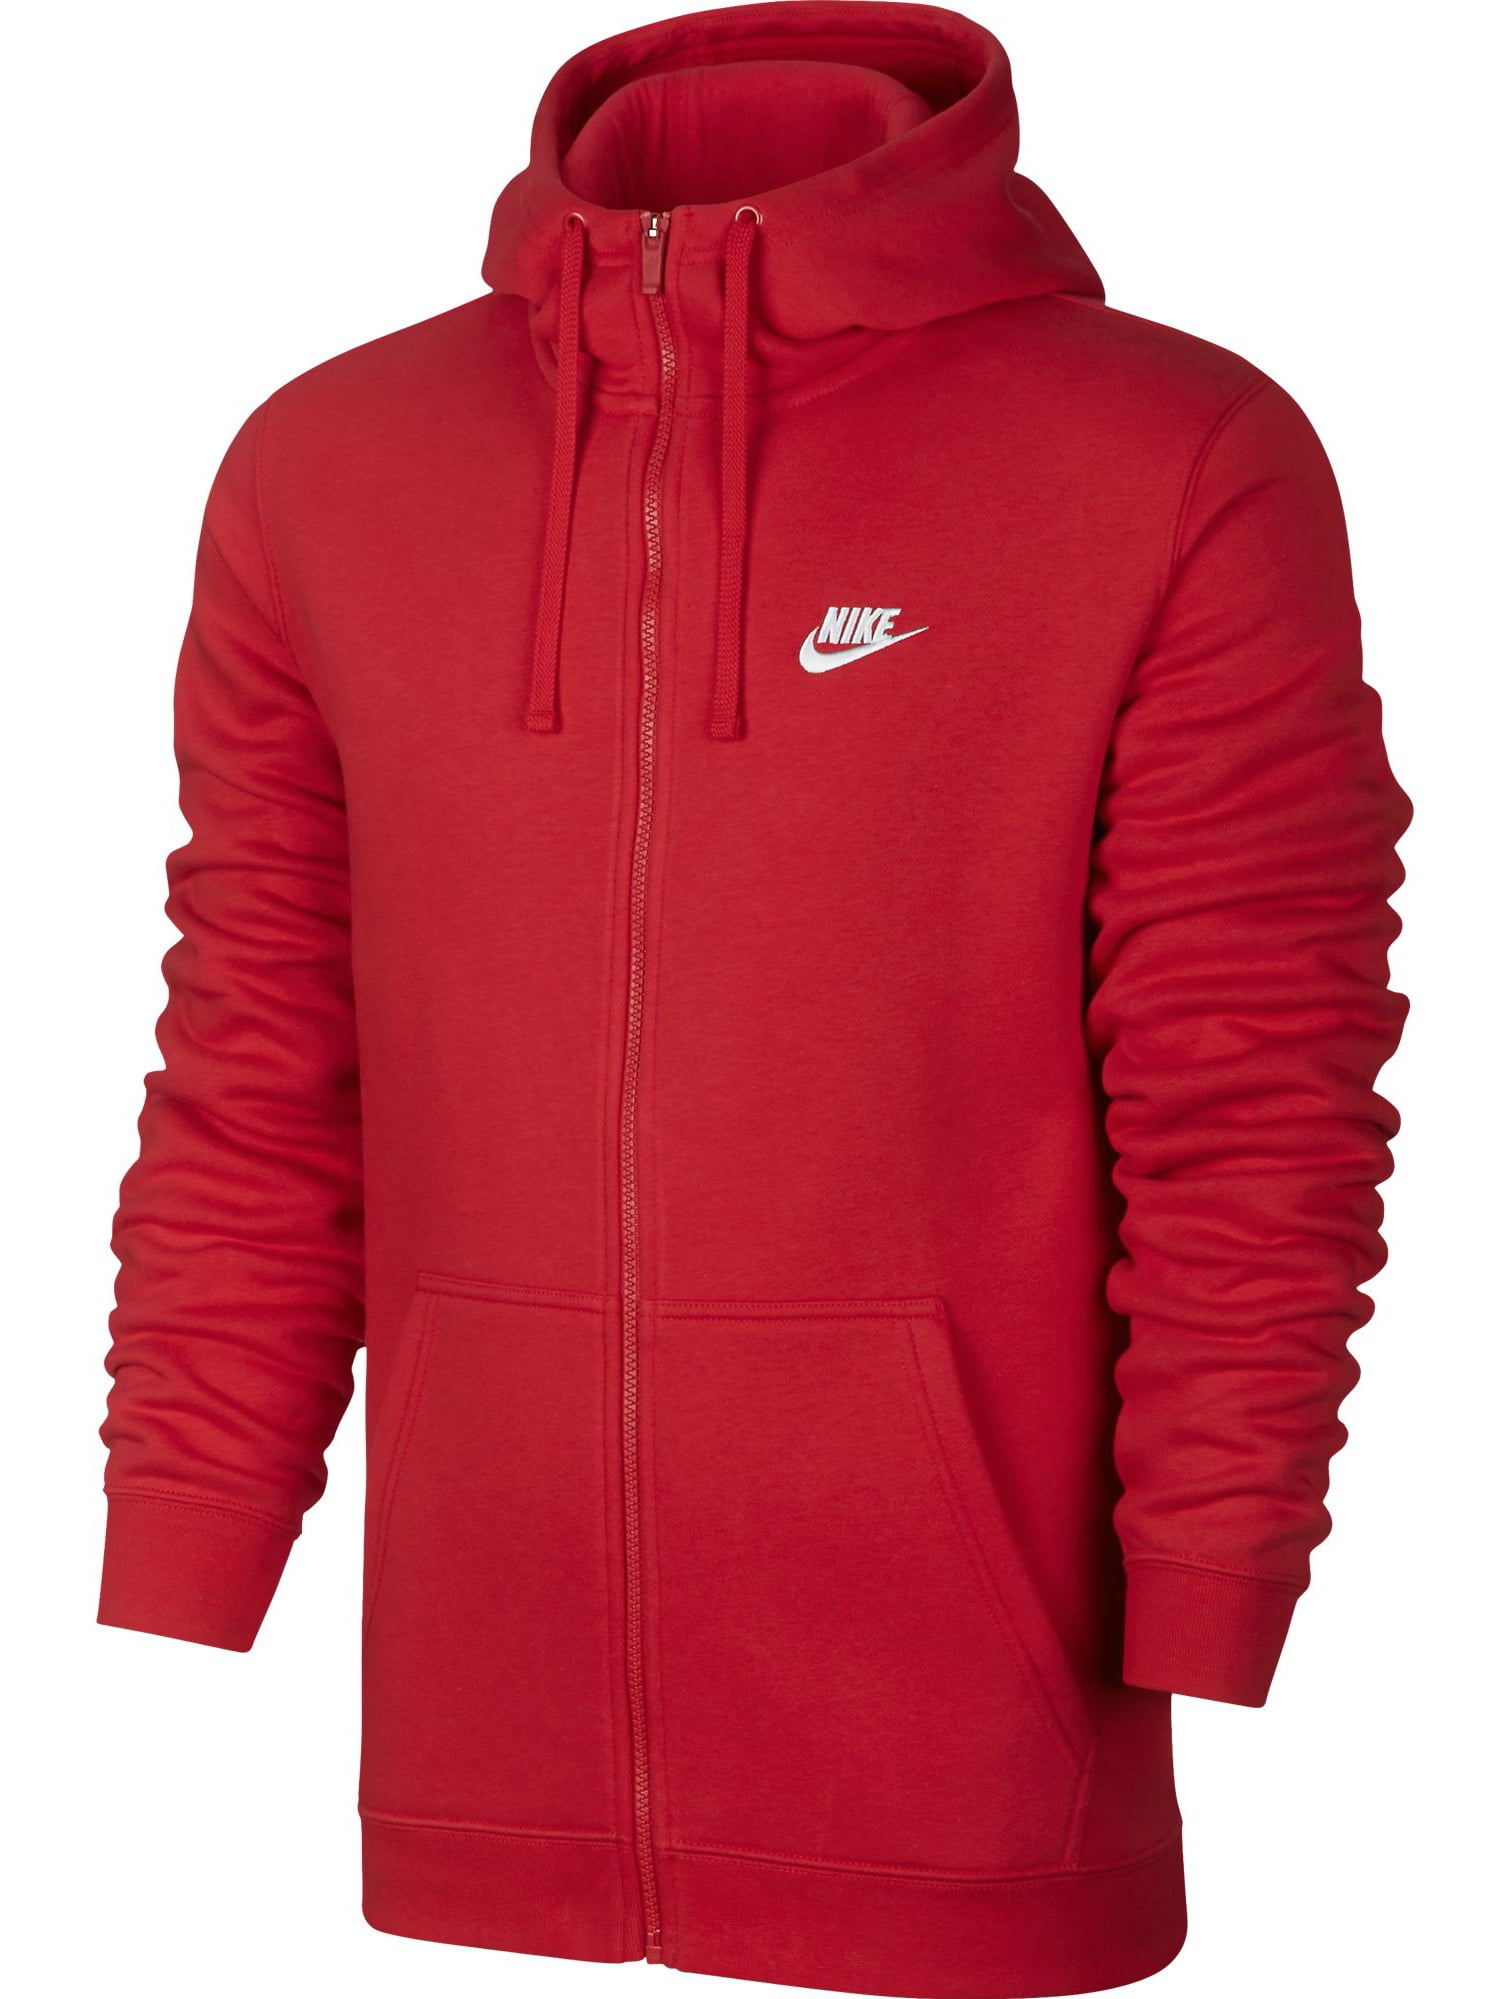 Red and white hoodie